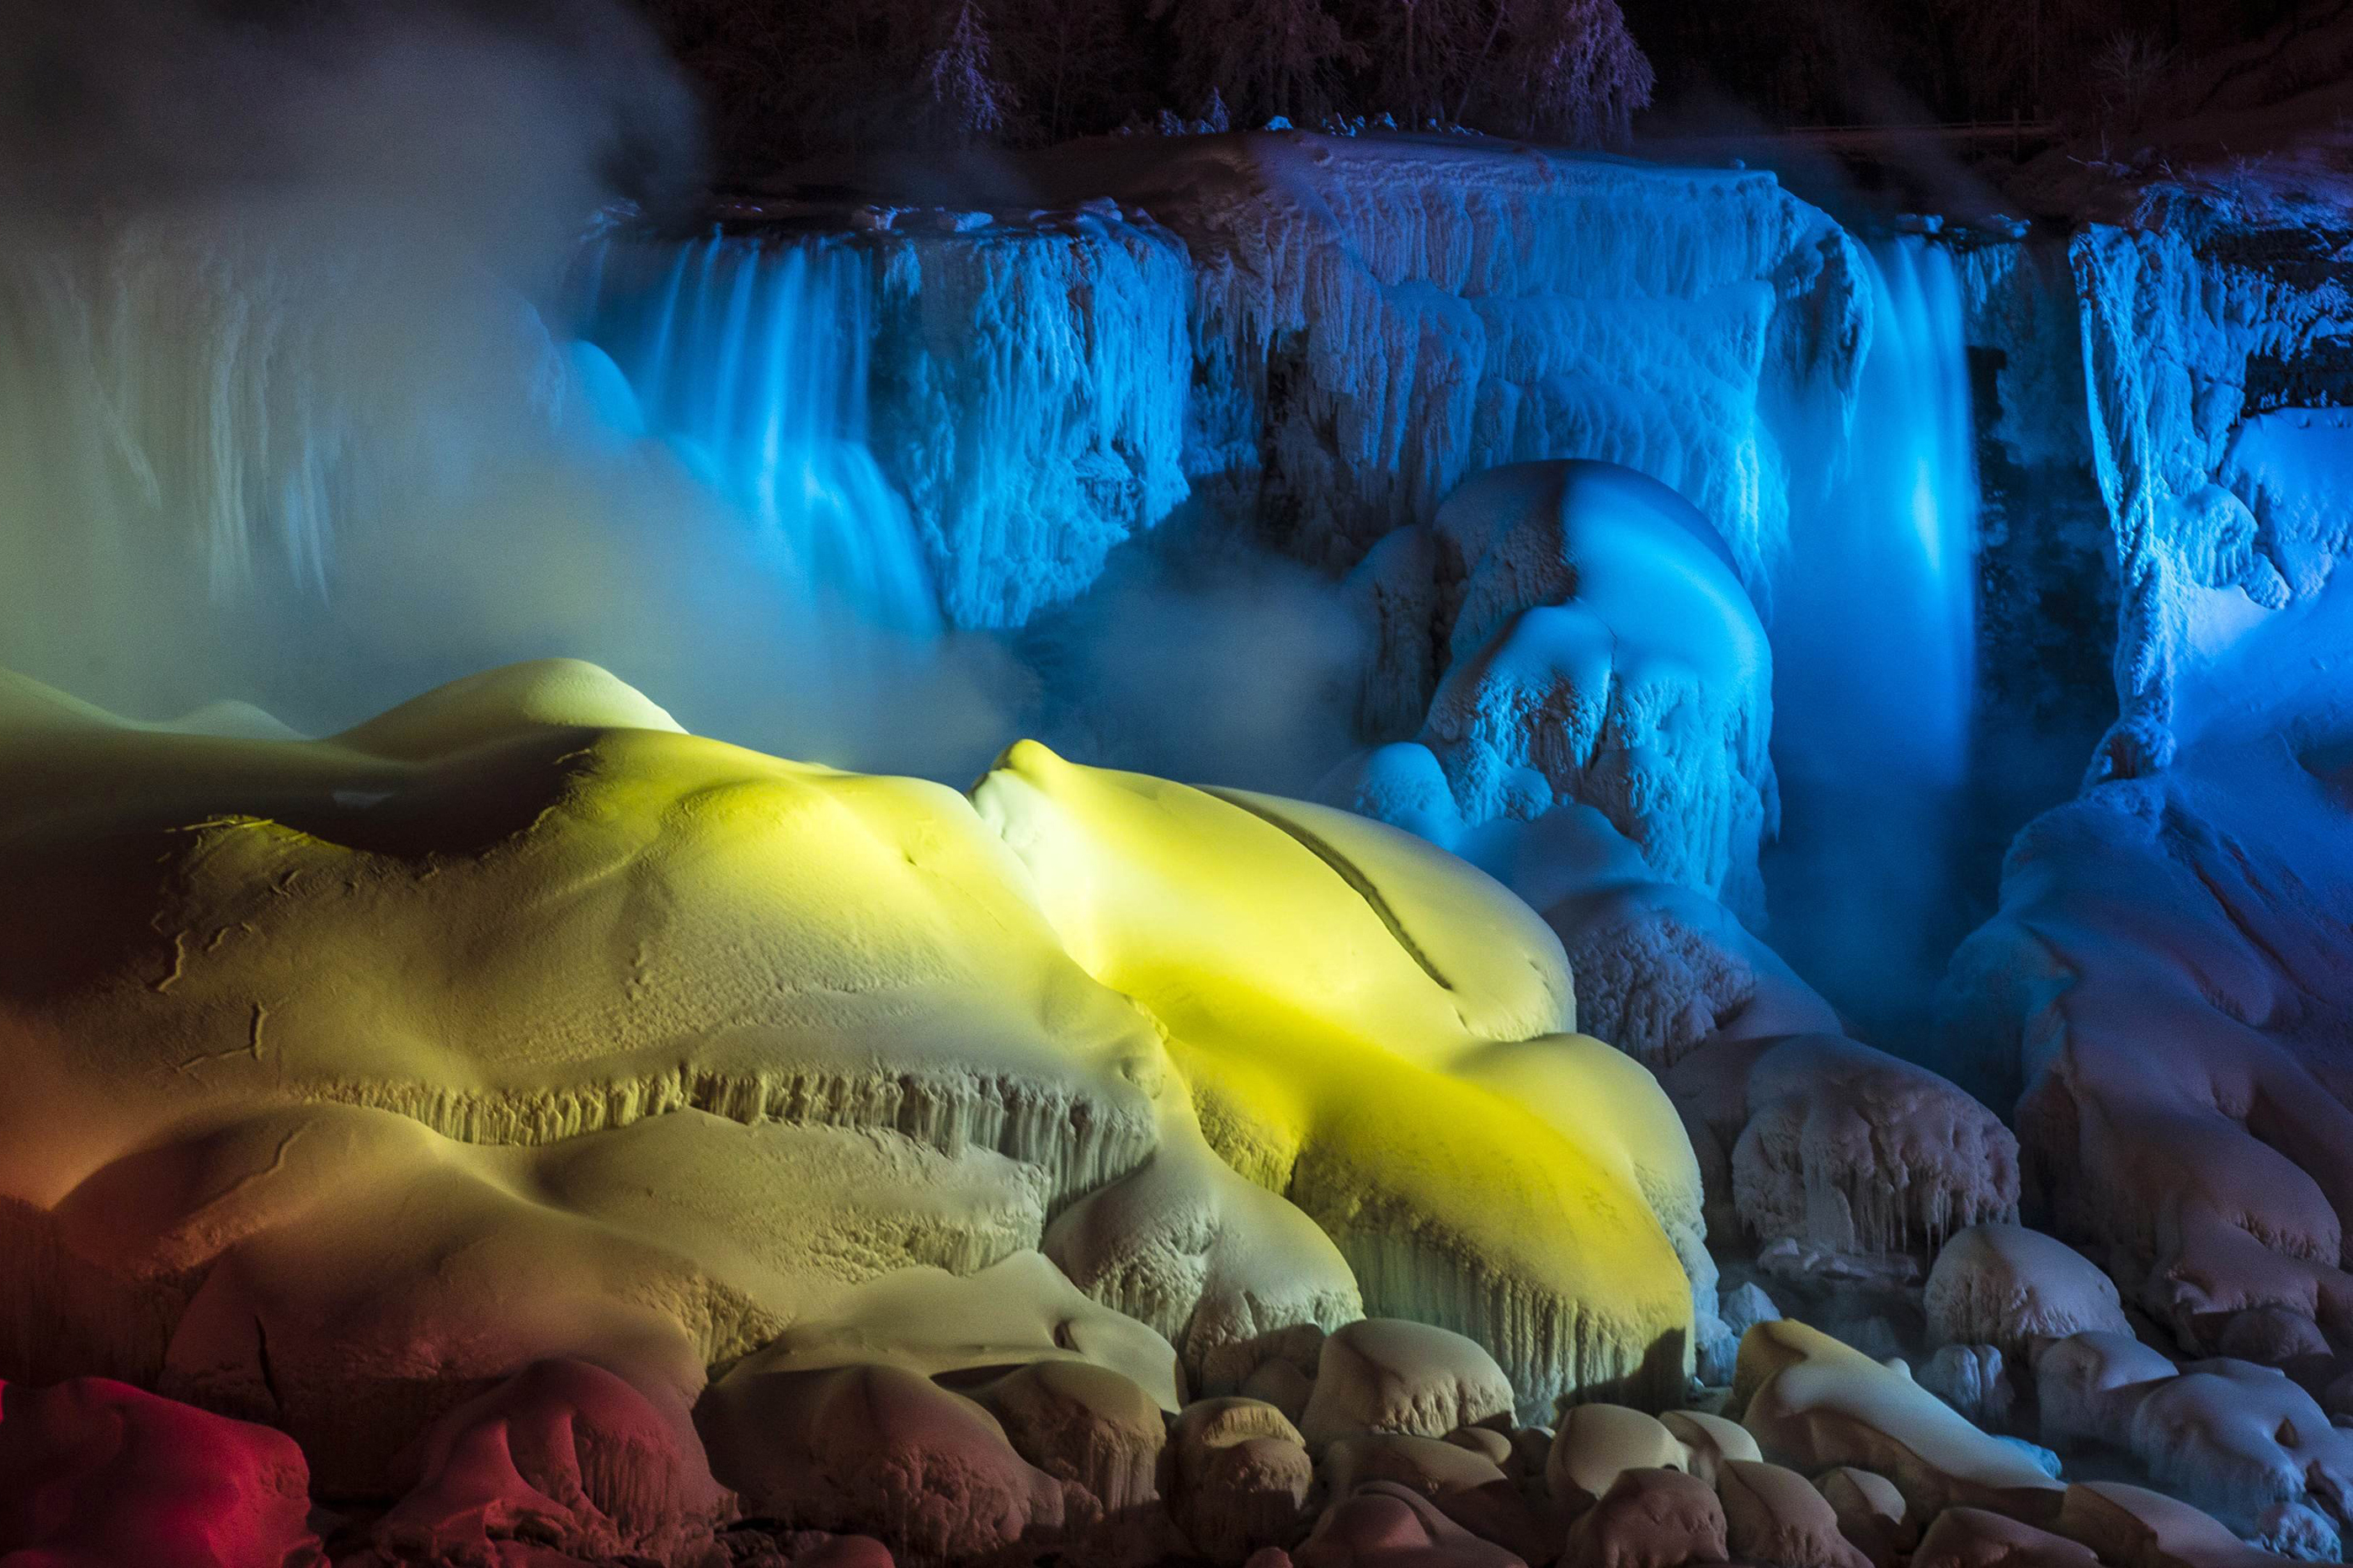 A partially frozen Niagara Falls is seen on American side lit by lights during sub freezing temperatures in Niagara Falls, Ontario, March 3, 2014.